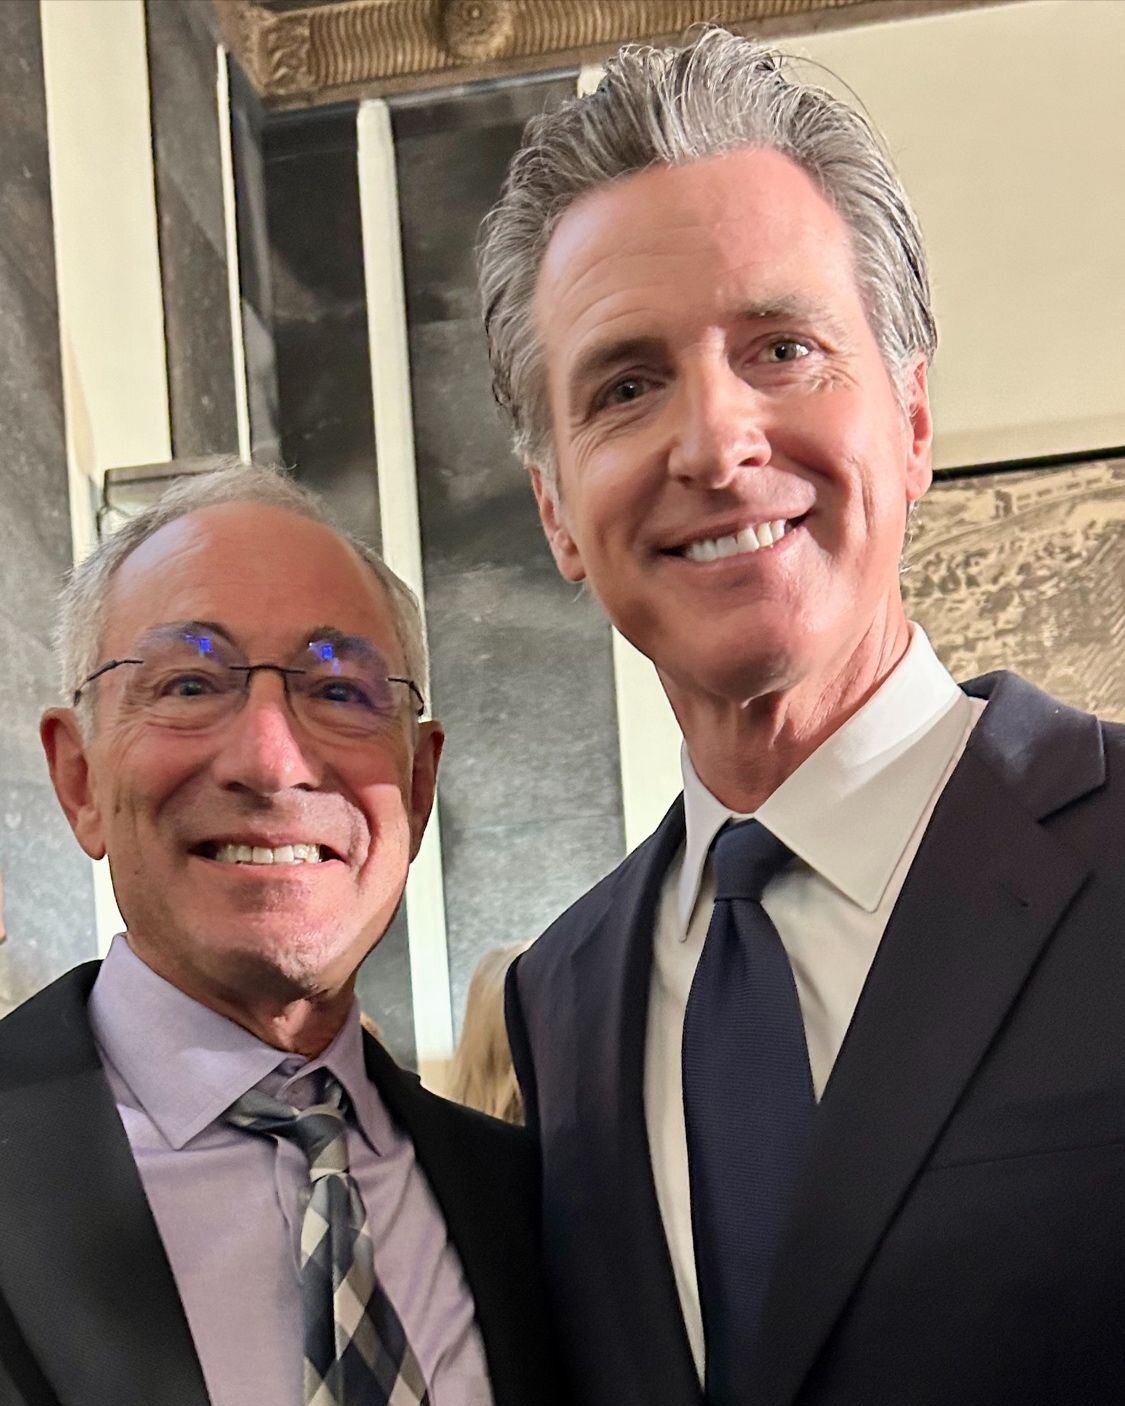 Honored to join Governor @GavinNewsom for the signing ceremony on two historic mental health bills. One builds accountability into California's Mental Health Services Act. The other builds capacity for people with serious mental illness.

Along with 